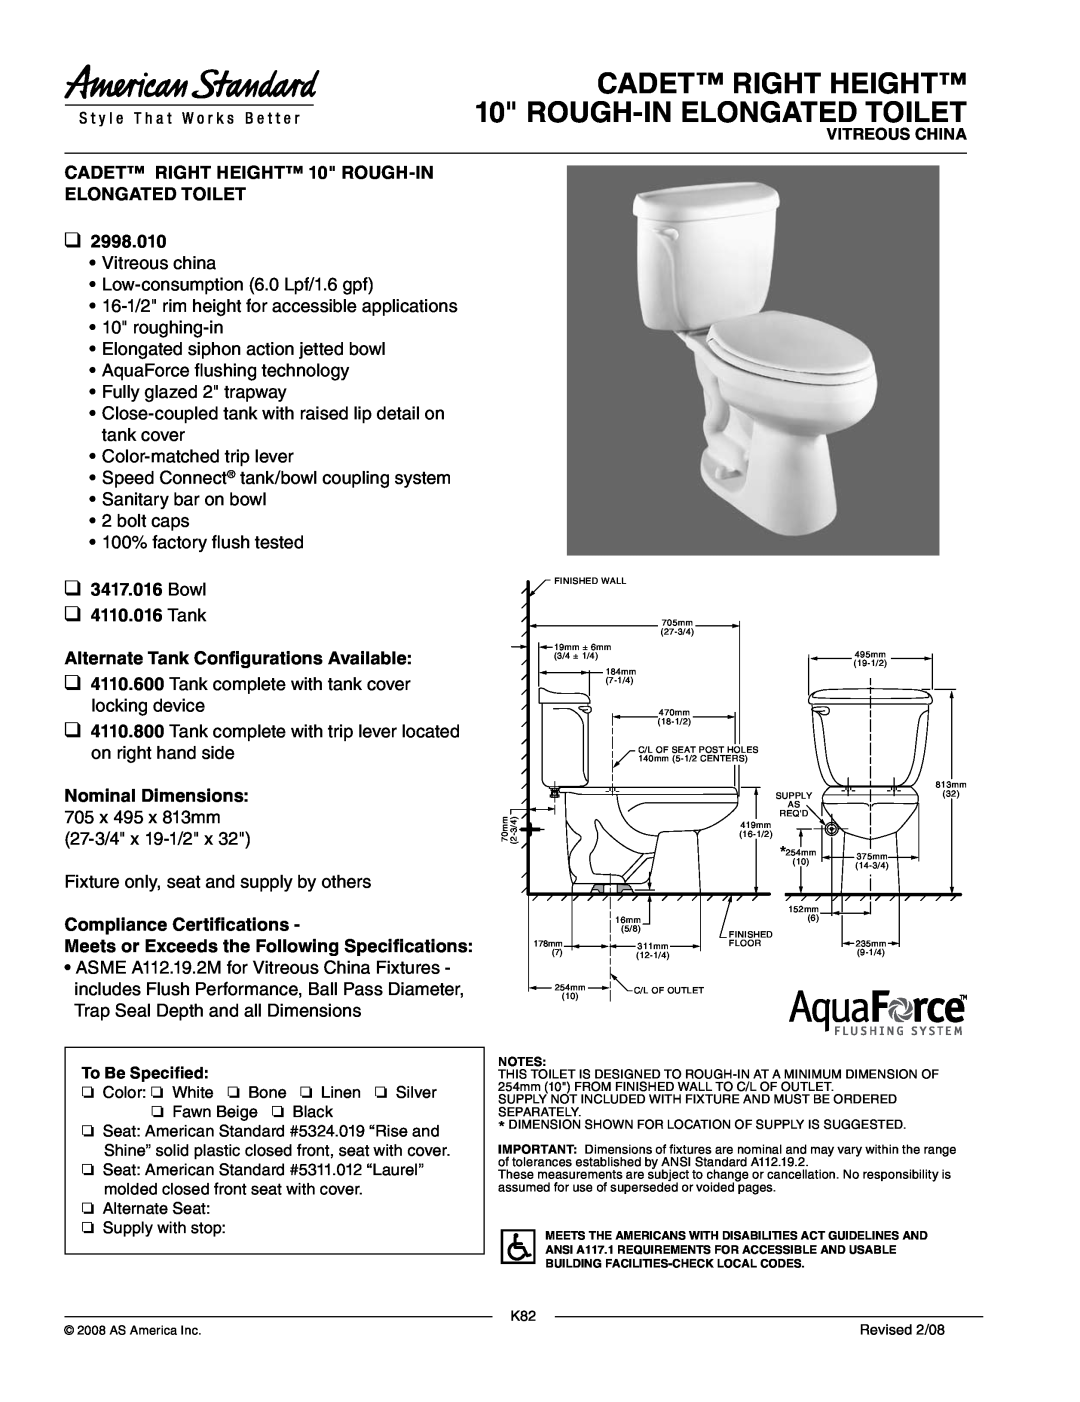 American Standard 2998.010, 3417.016 dimensions CADET RIGHT HEIGHT 10 ROUGH-INELONGATED TOILET, Bowl 4110.016 Tank 